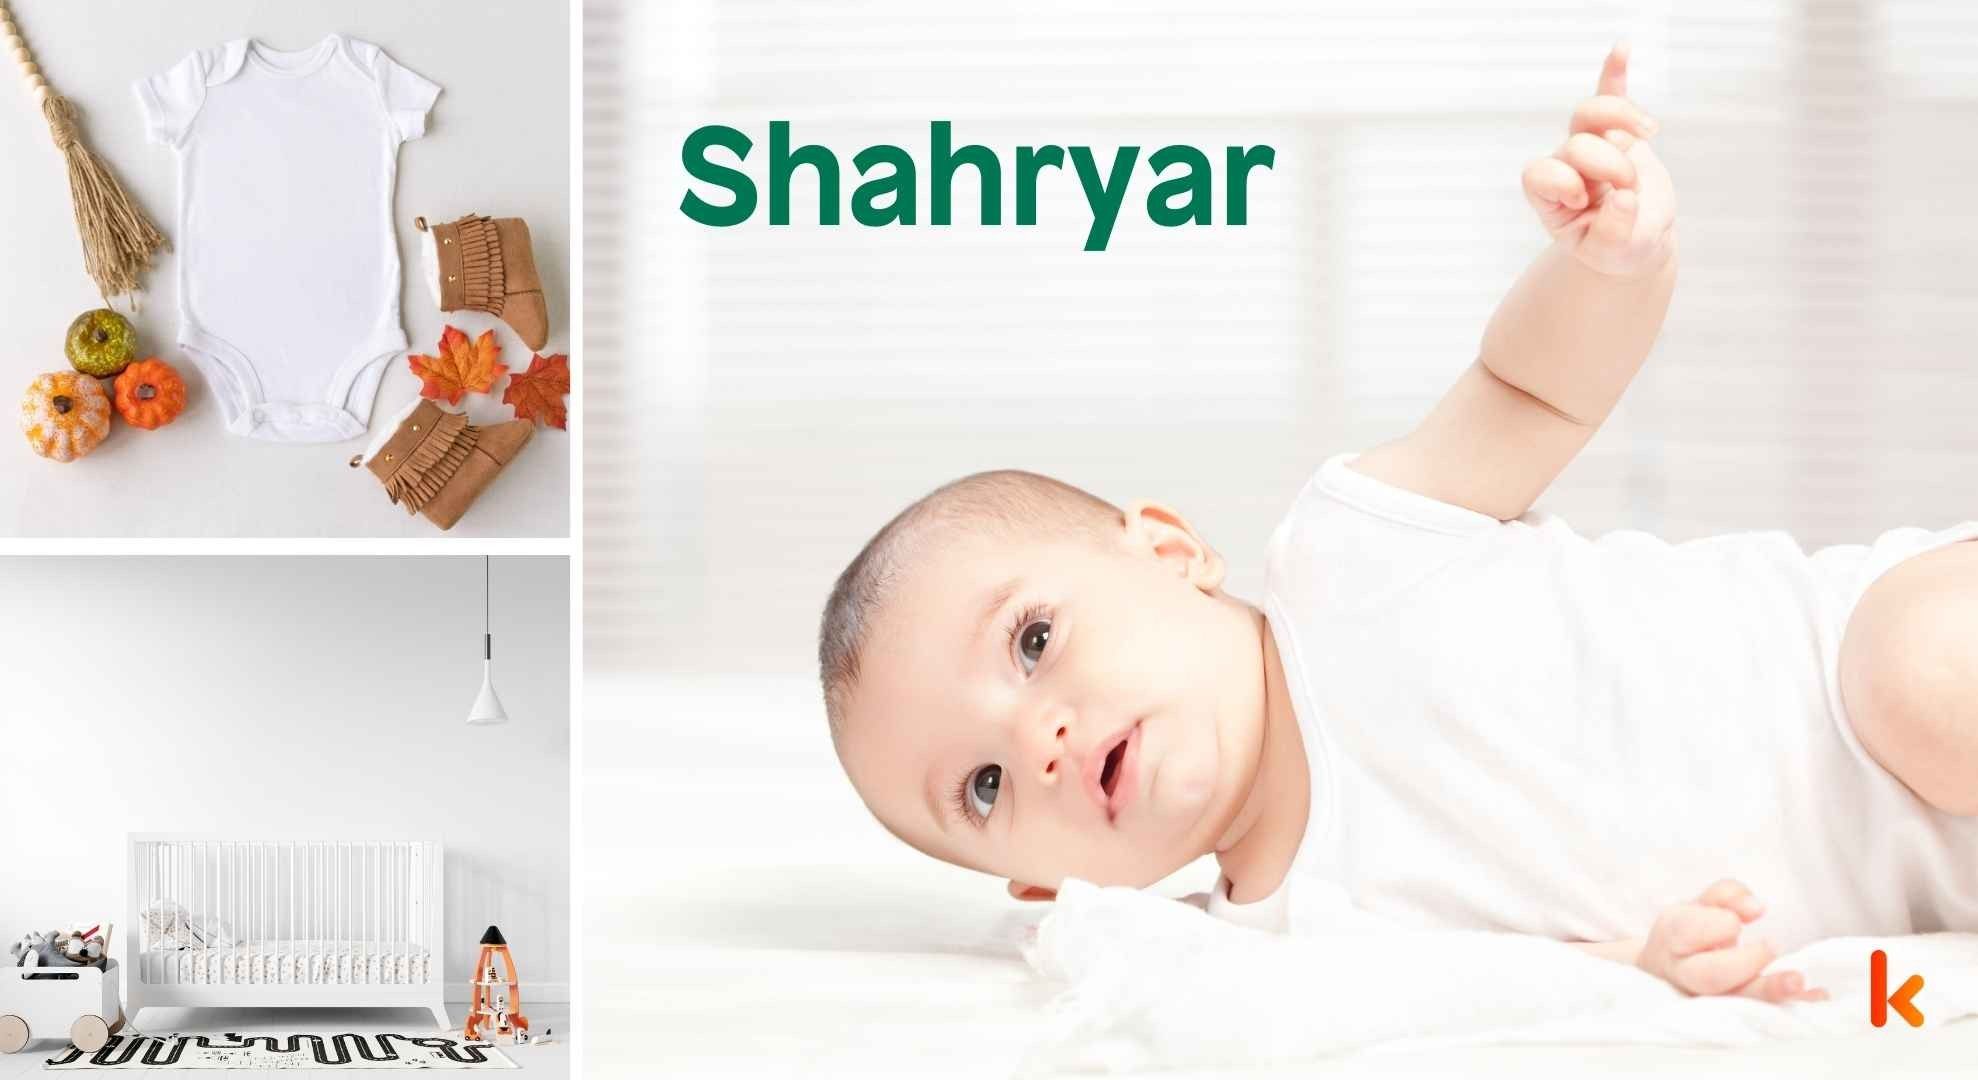 Meaning of the name Shahryar